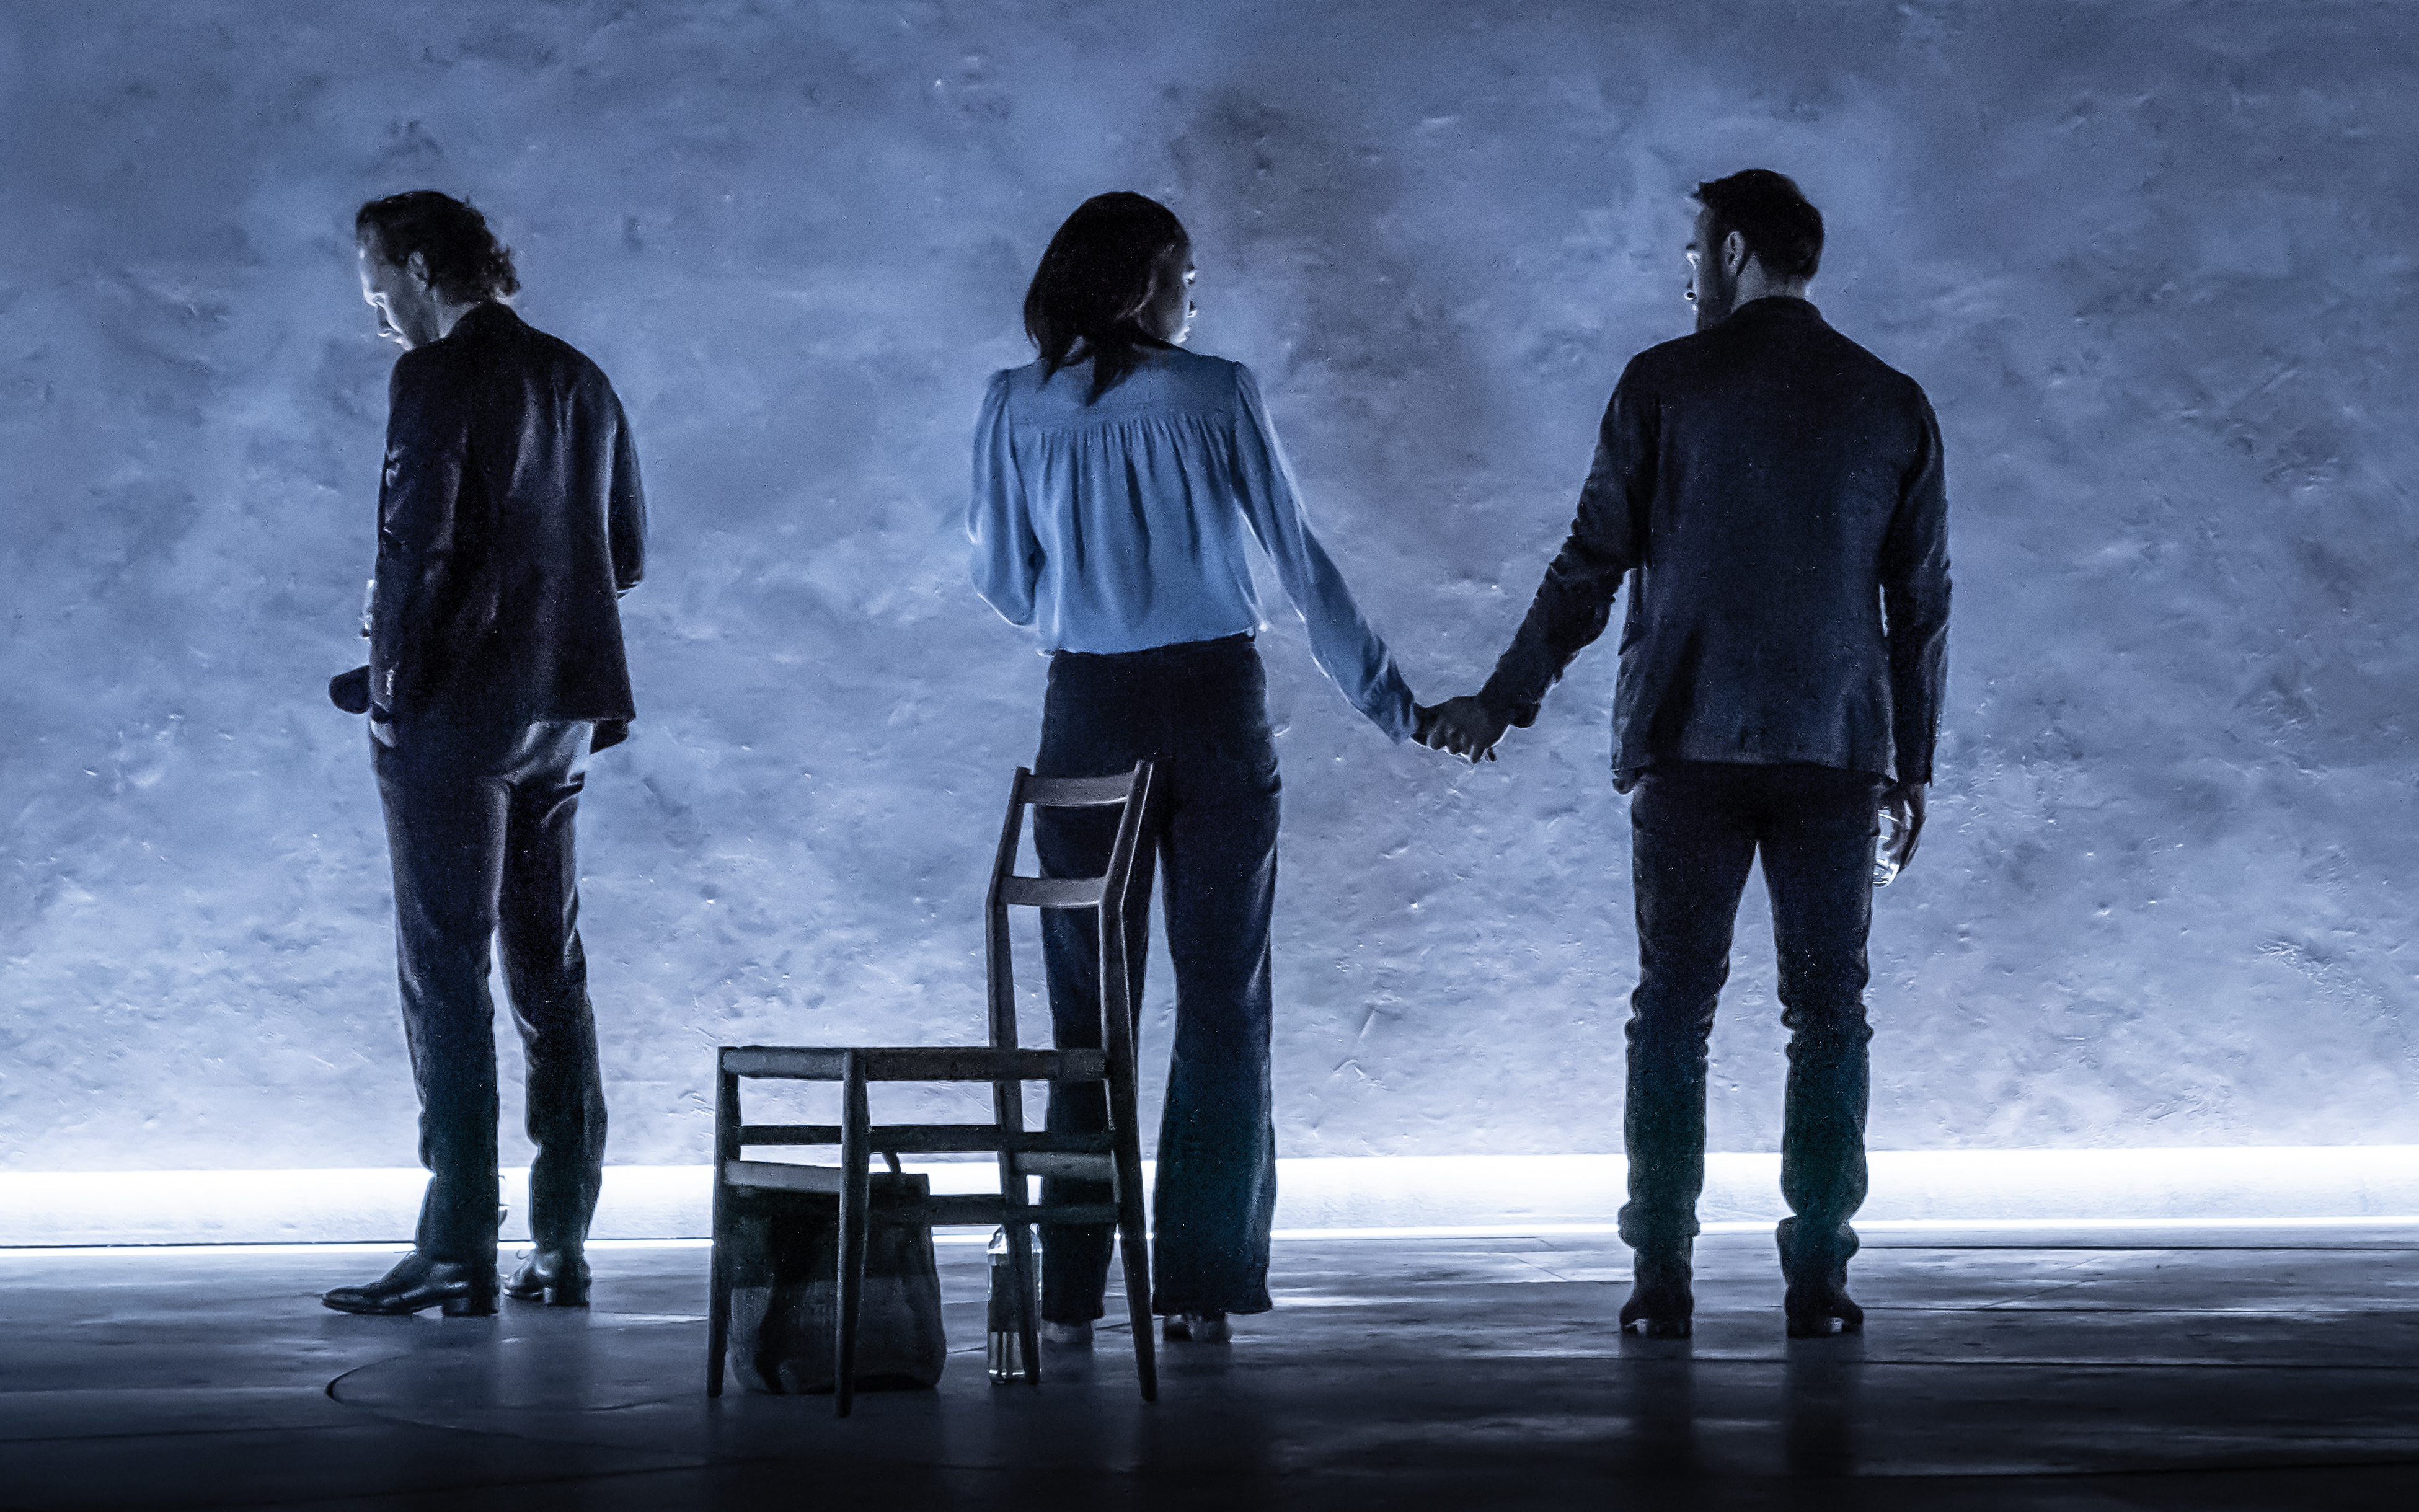 Tom Hiddleston (Robert), Zawe Ashton (Emma) and Charlie Cox (Jerry) in 'Betrayal' directed by Jamie Lloyd. Photo credit Marc Brenner